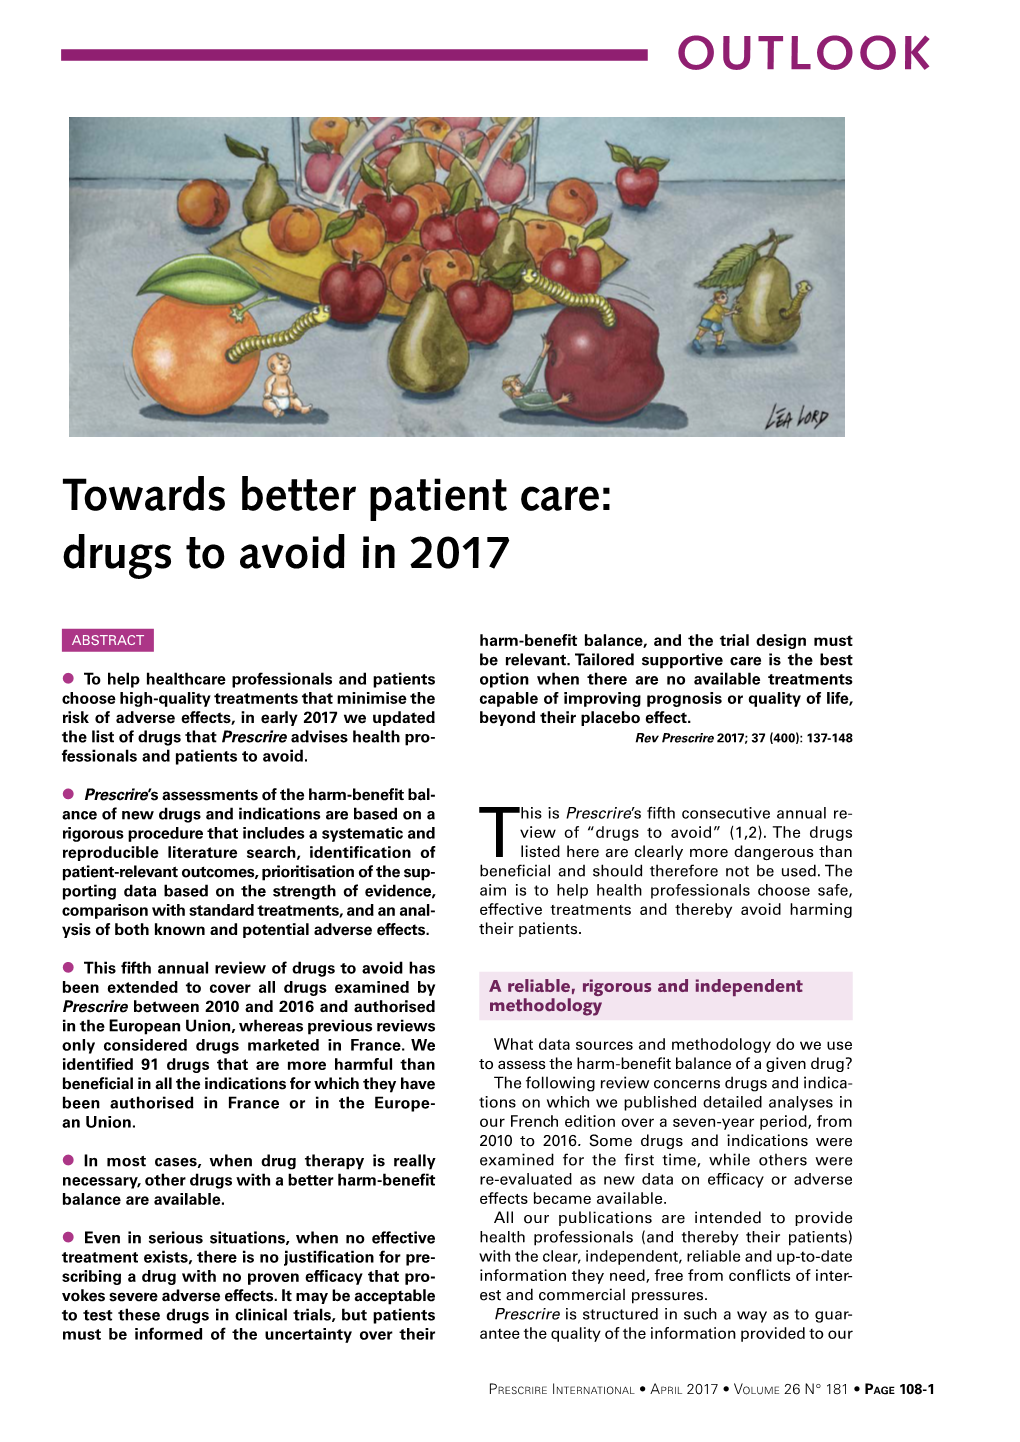 Towards Better Patient Care: Drugs to Avoid in 2017